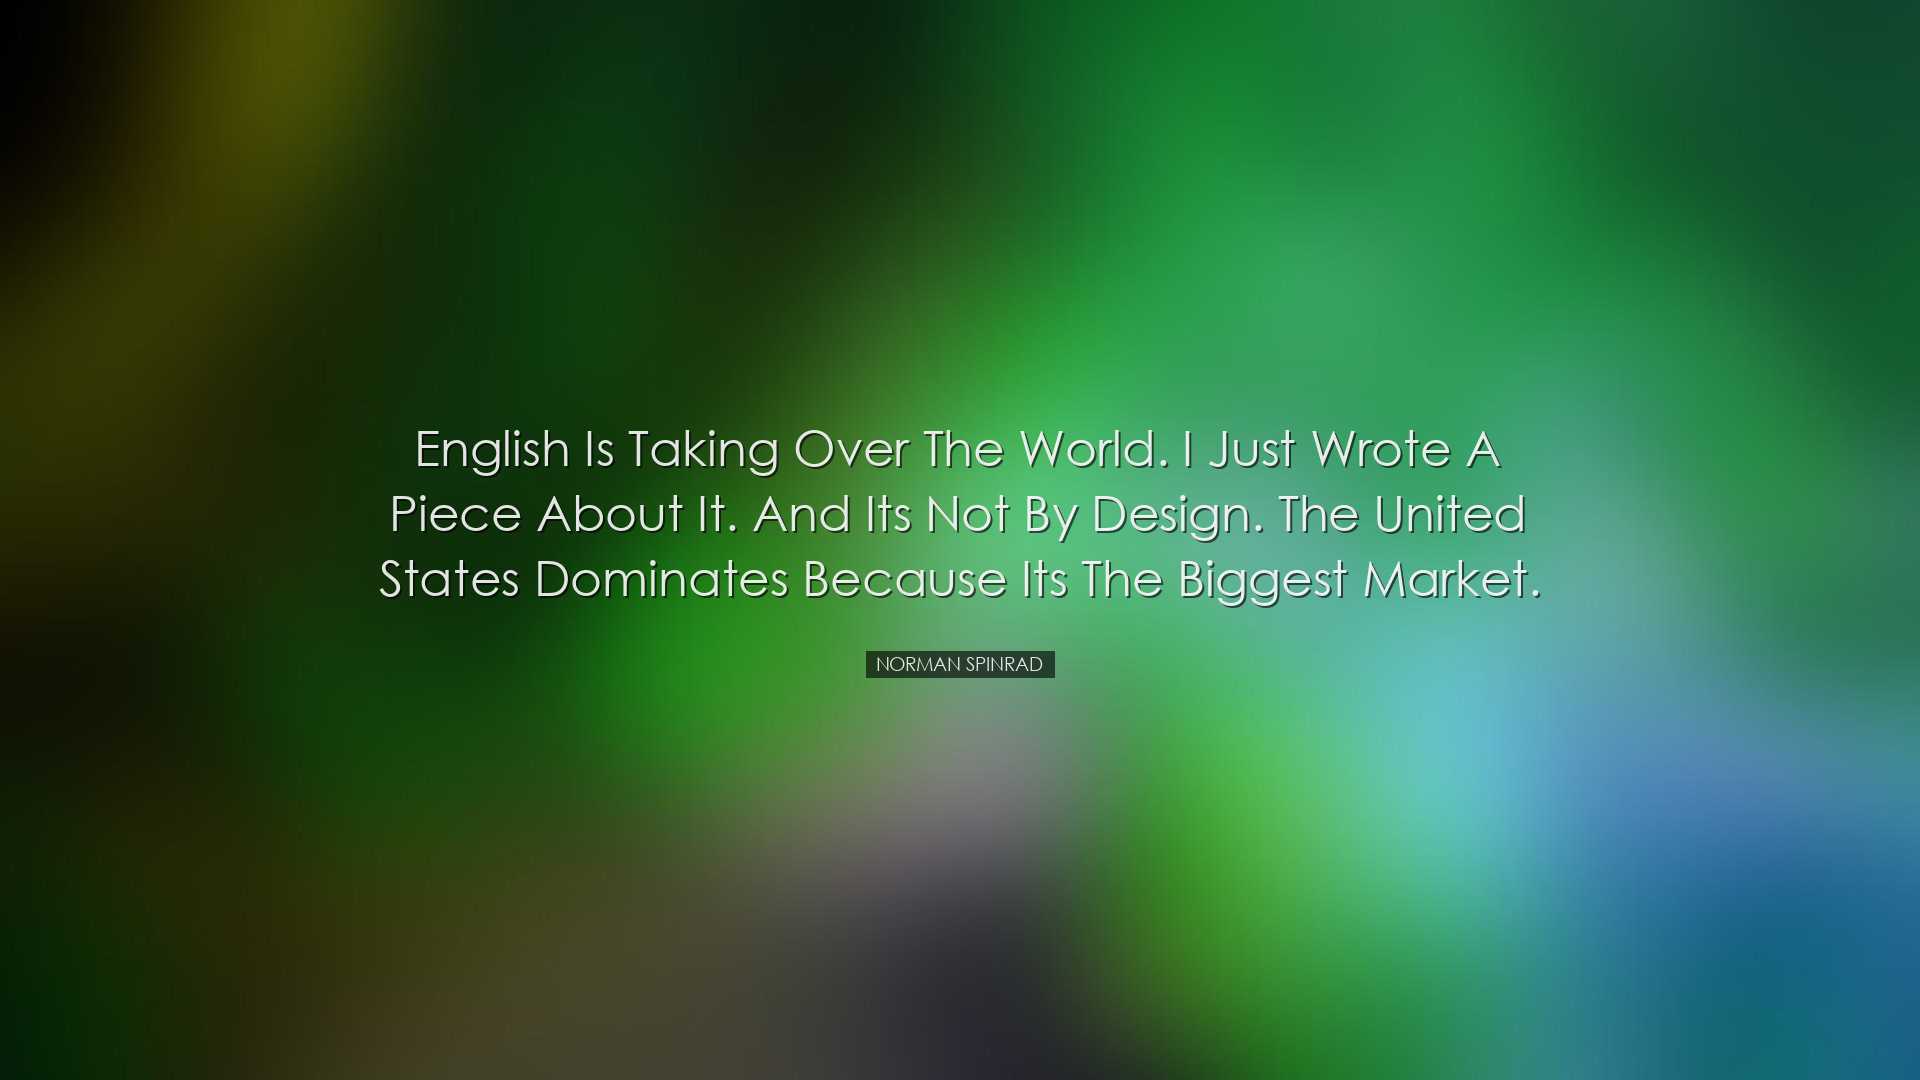 English is taking over the world. I just wrote a piece about it. A